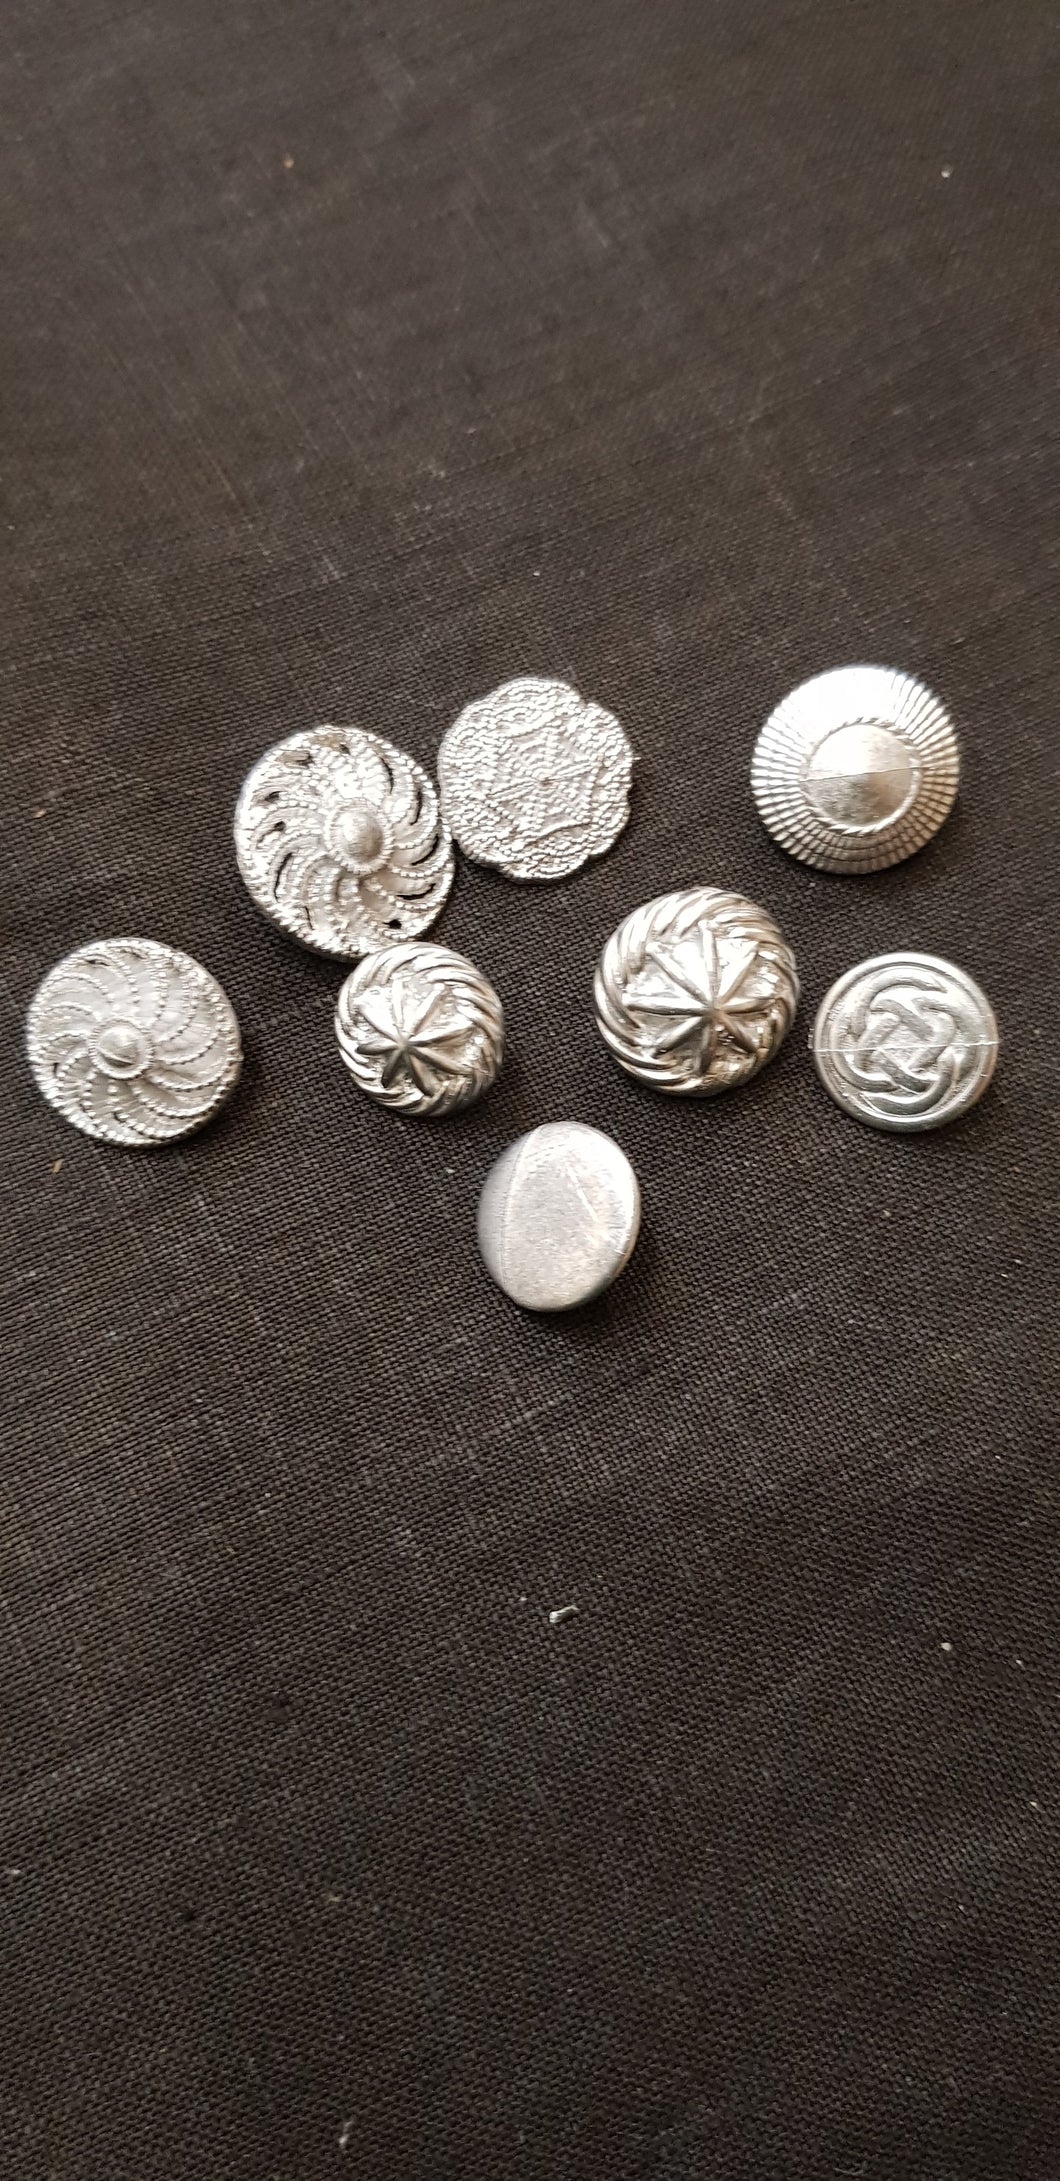 New Pewter Buttons